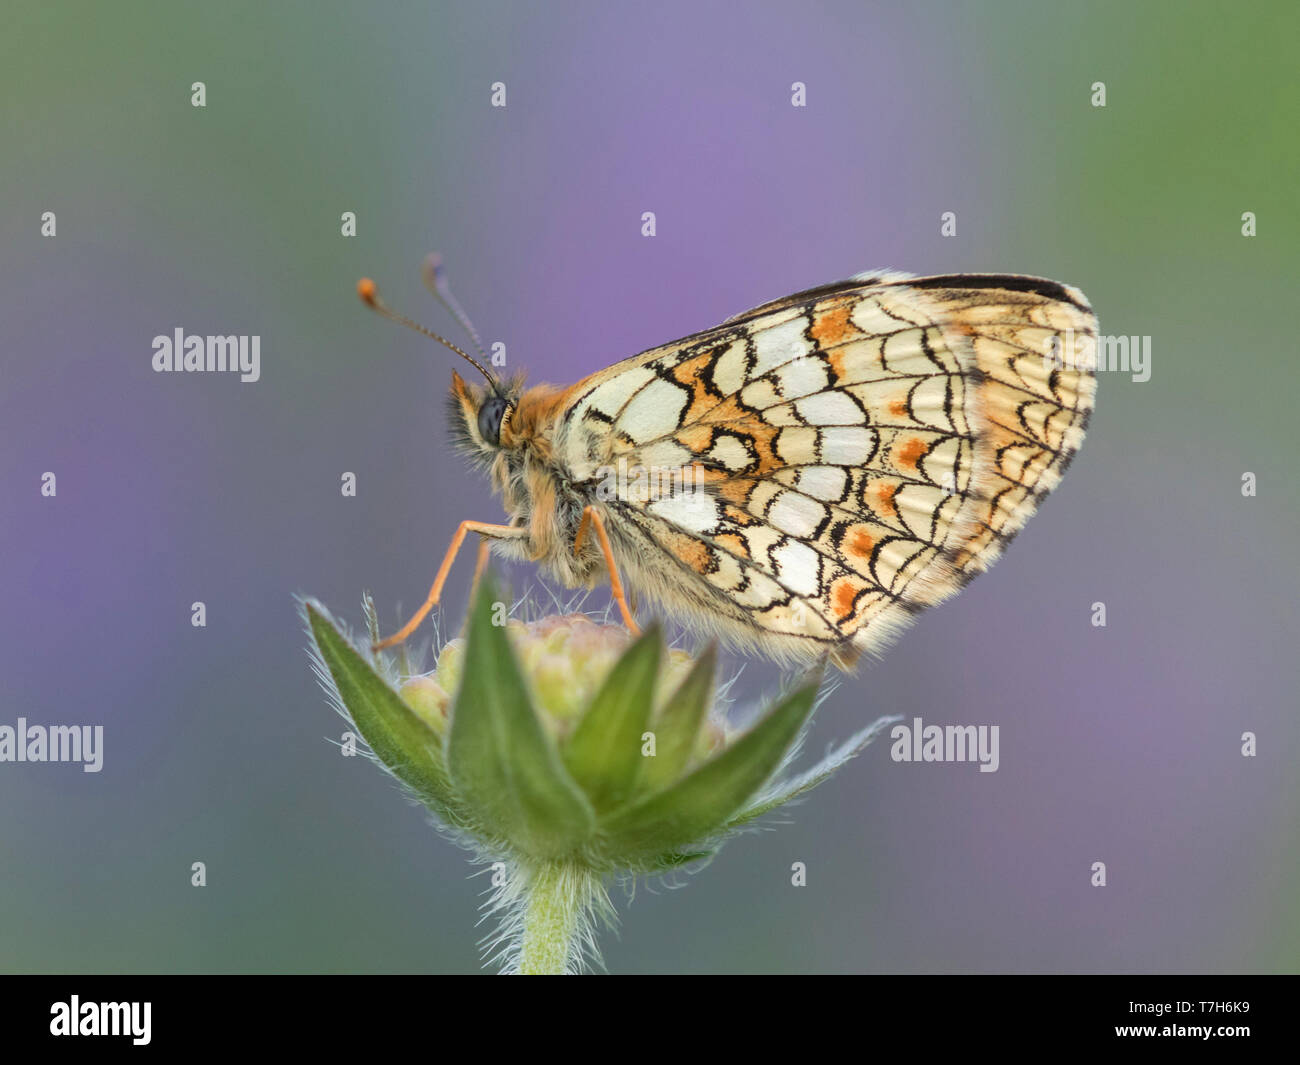 Heath Fritillary (Melitaea athalia) resting on top of small plant in Mercantour in France, against a natural purple colored background. Stock Photo